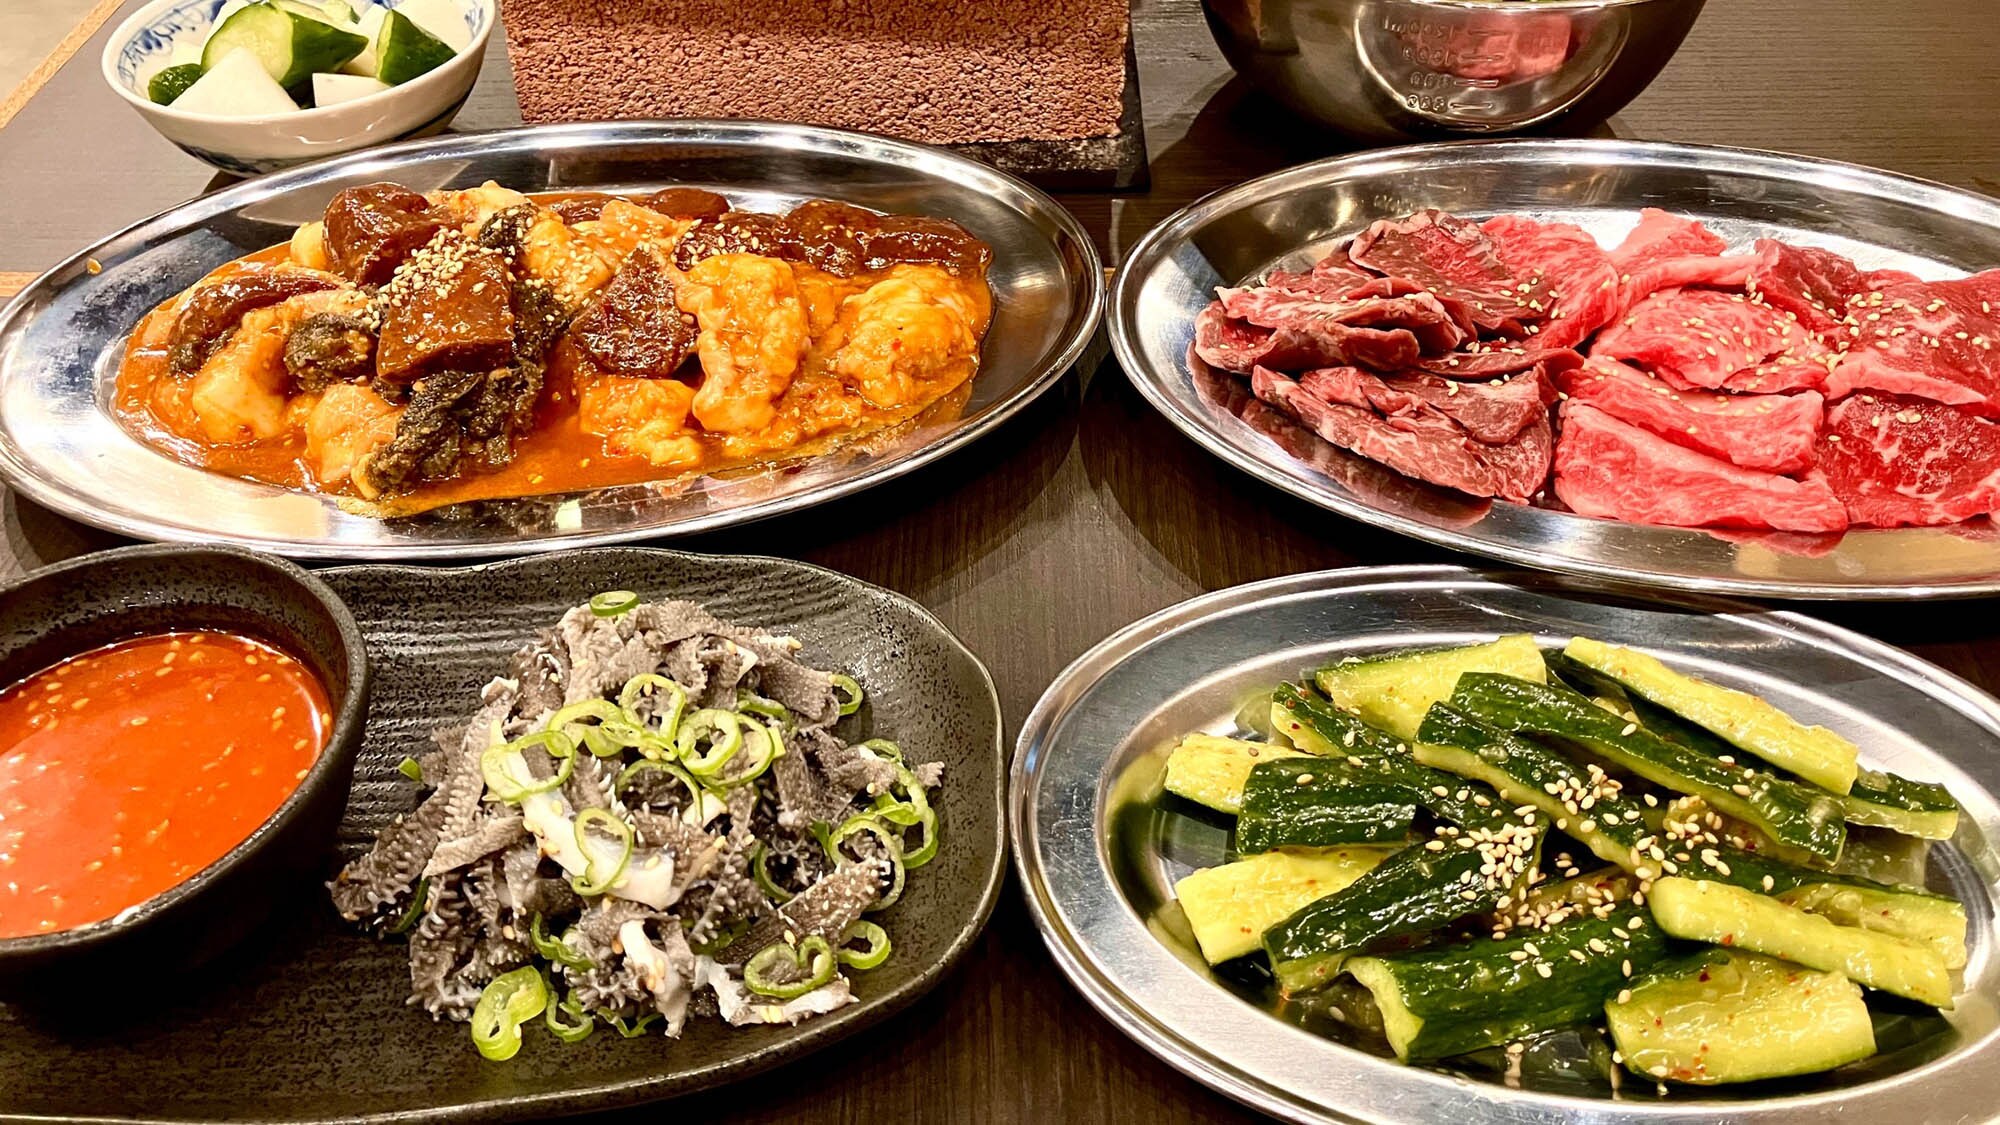 ・[Hormone grilled] A delicious assortment of meat♪ Enjoy it grilled to a crispy texture.